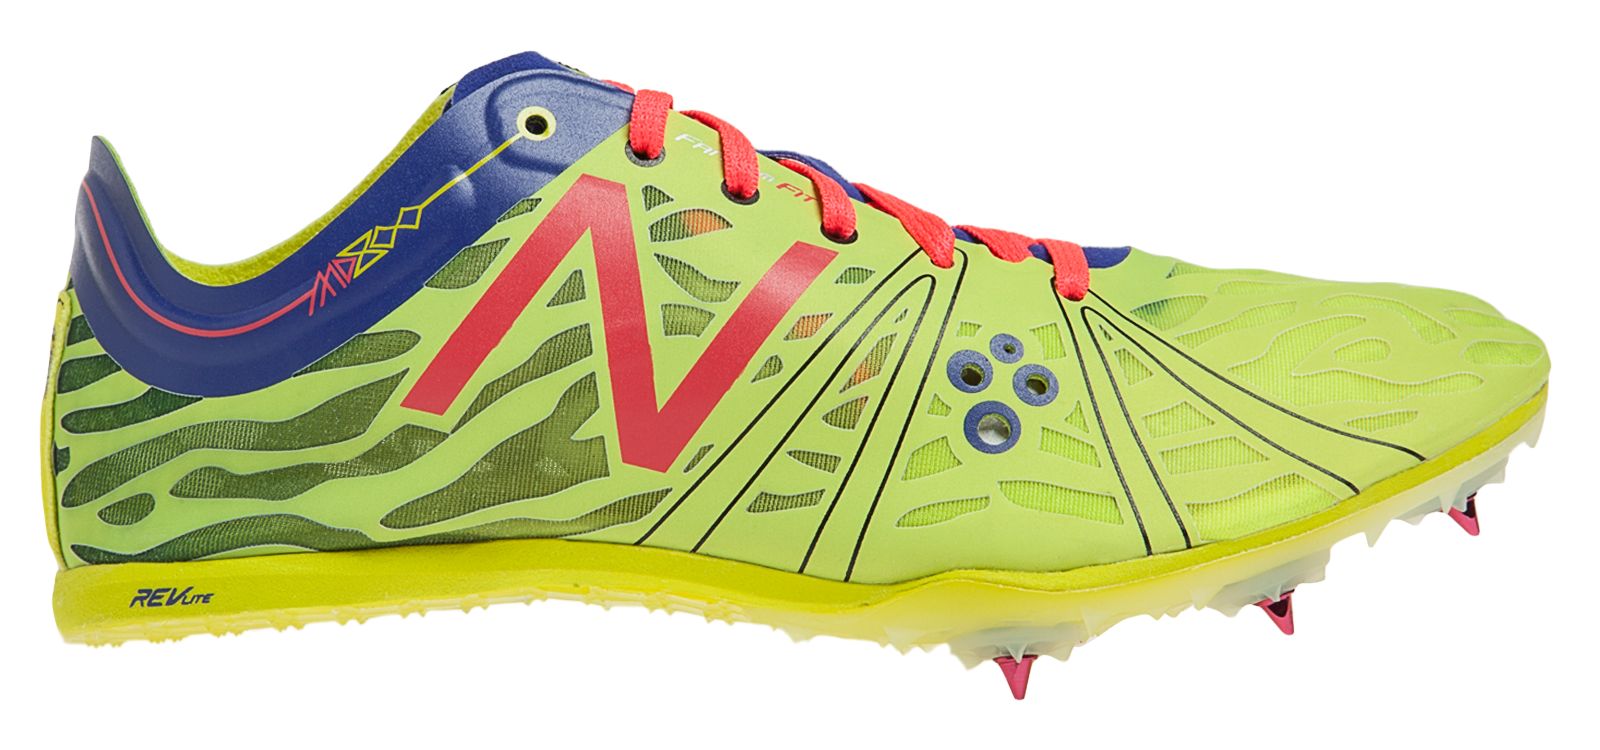 neon yellow track spikes